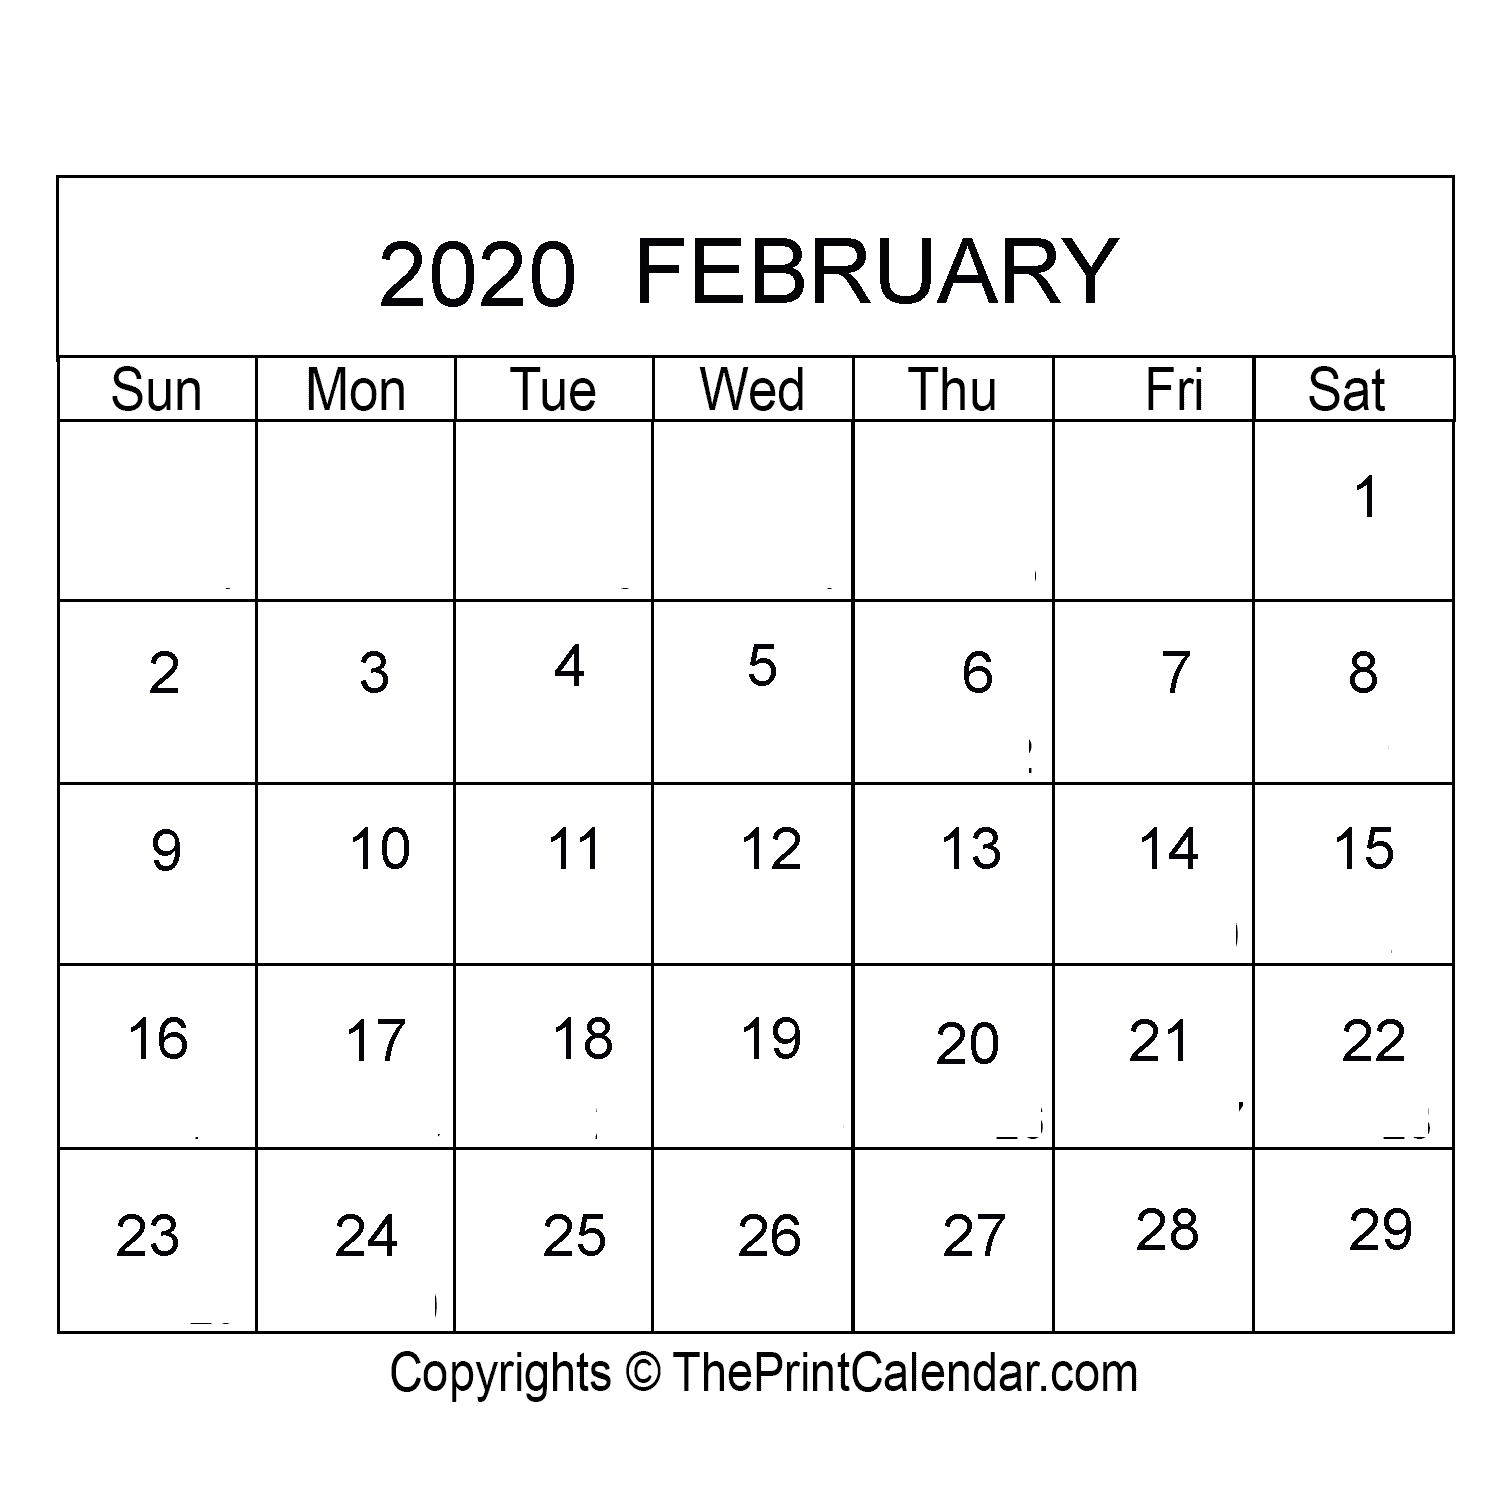 These Are Online Calendar Templates Which Are Editable And